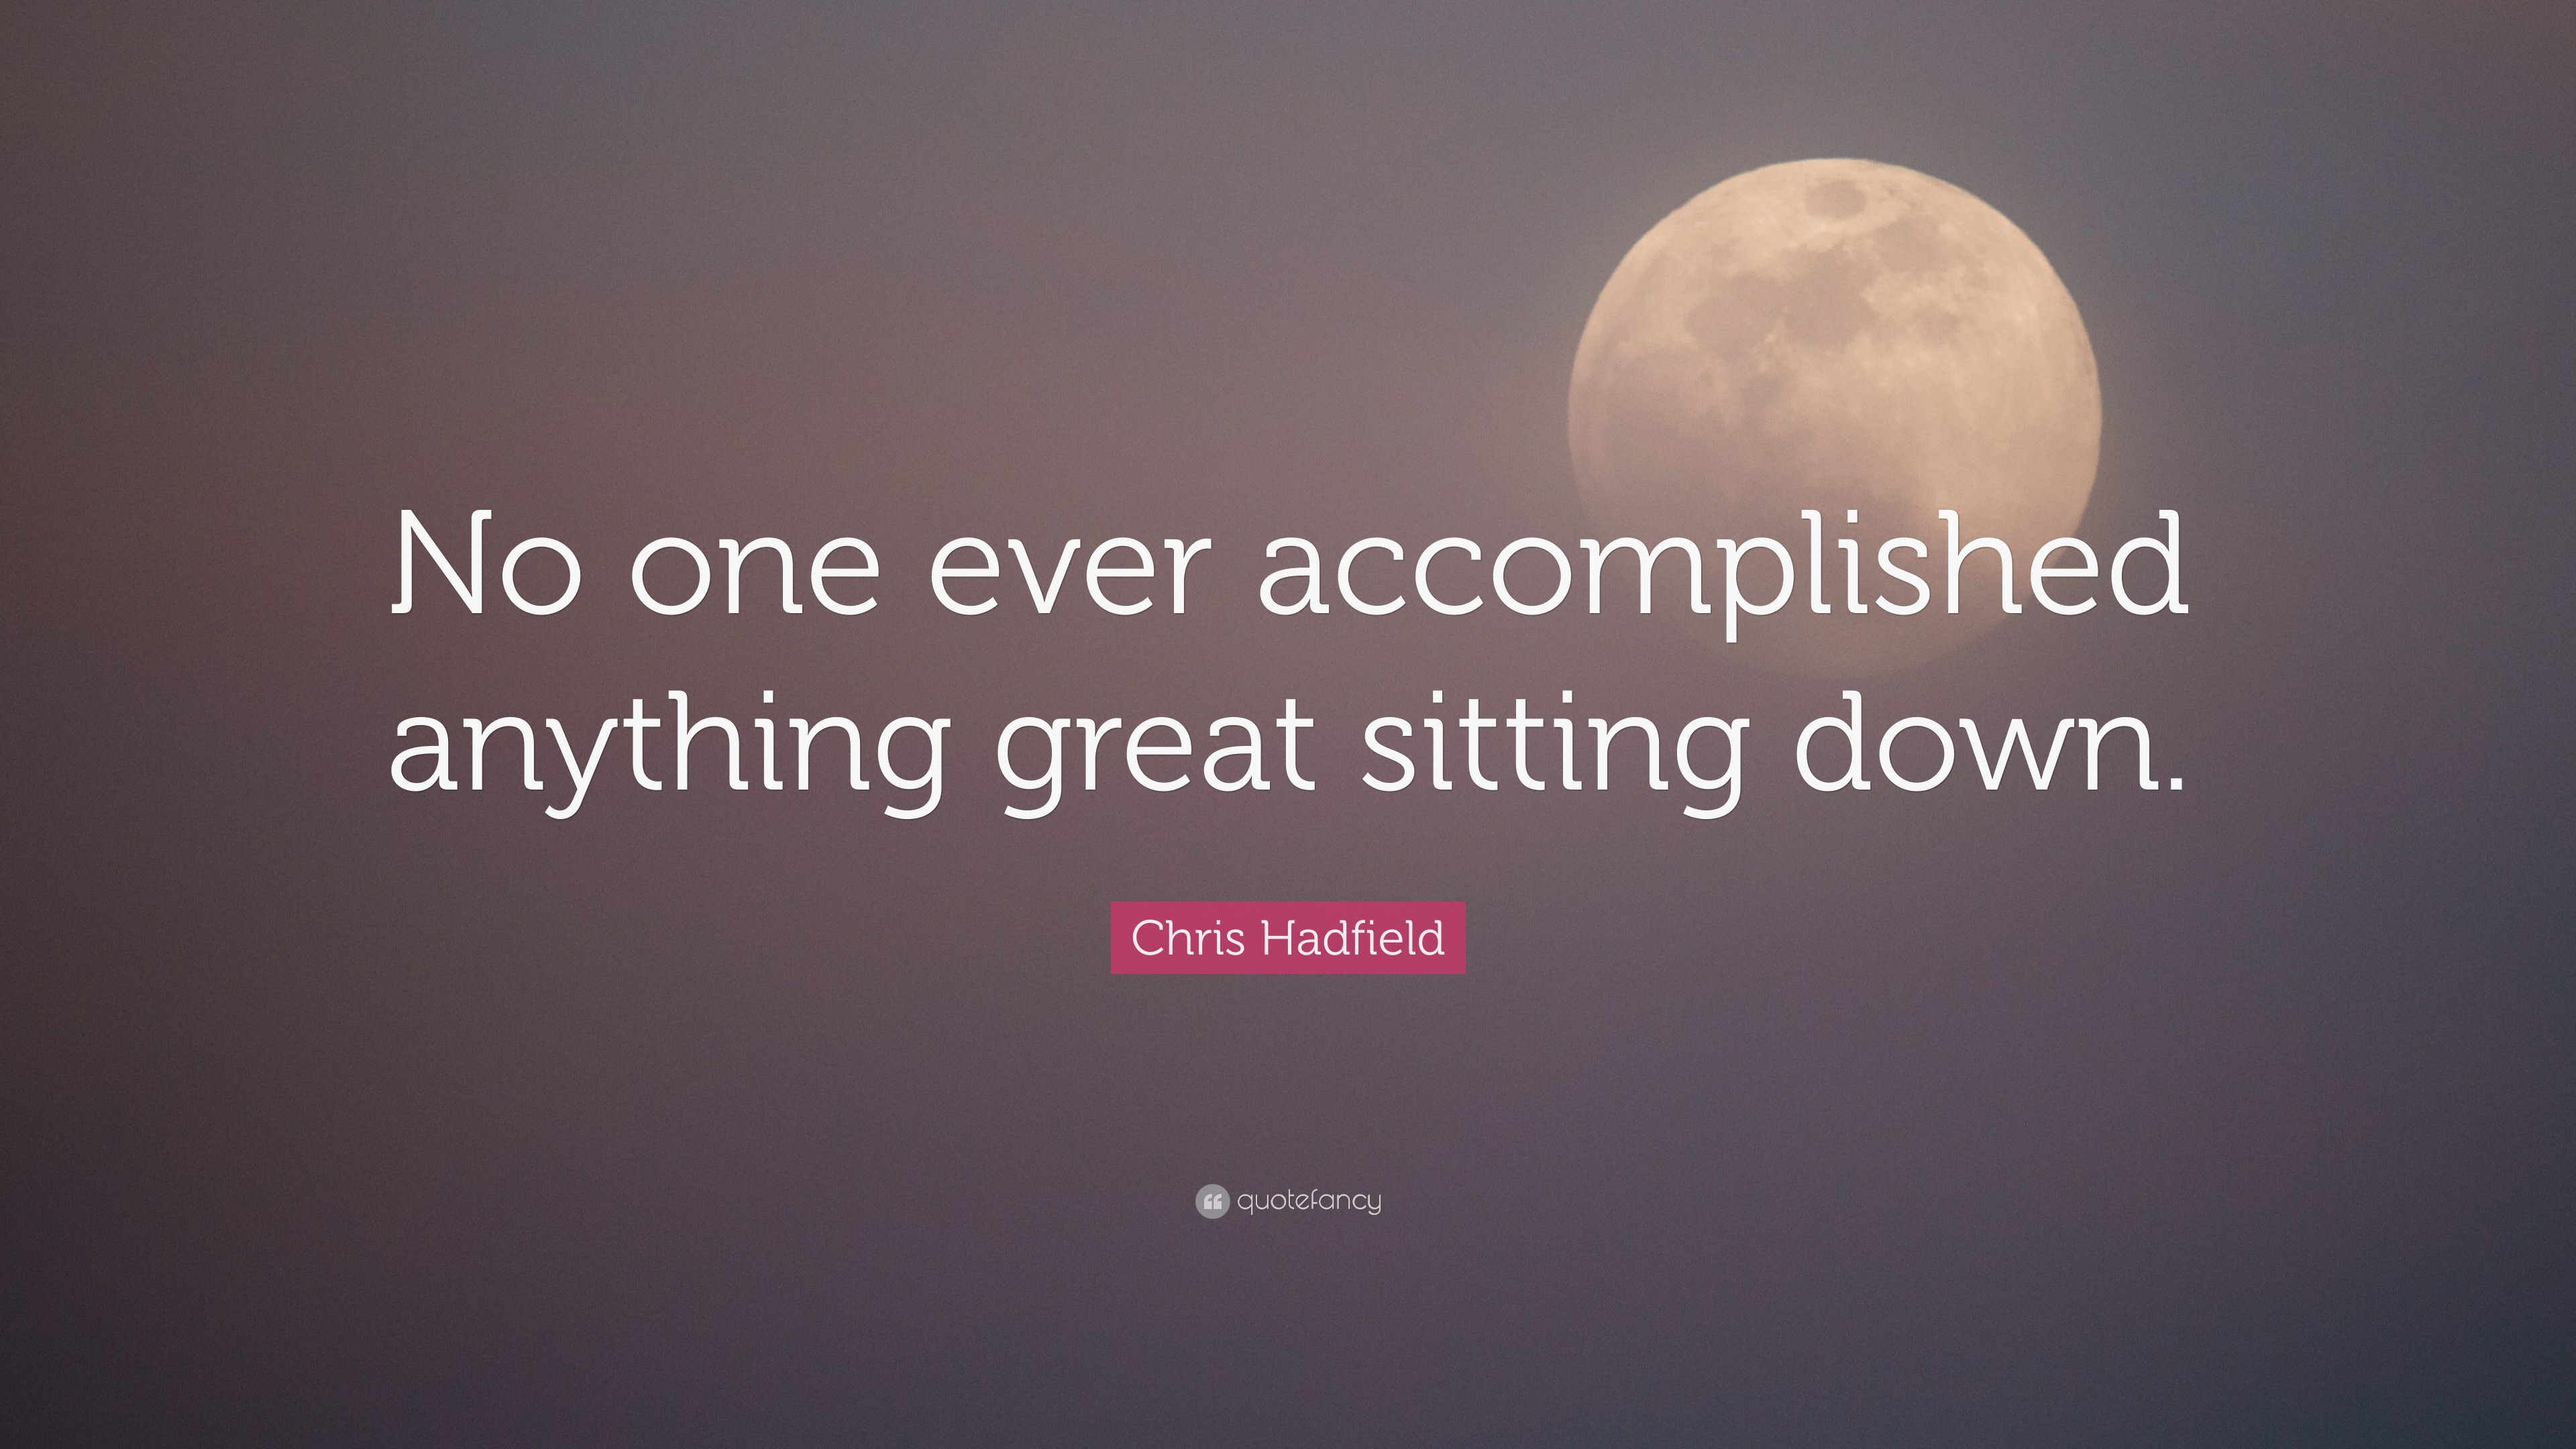 quotes about astronaut hadfield space